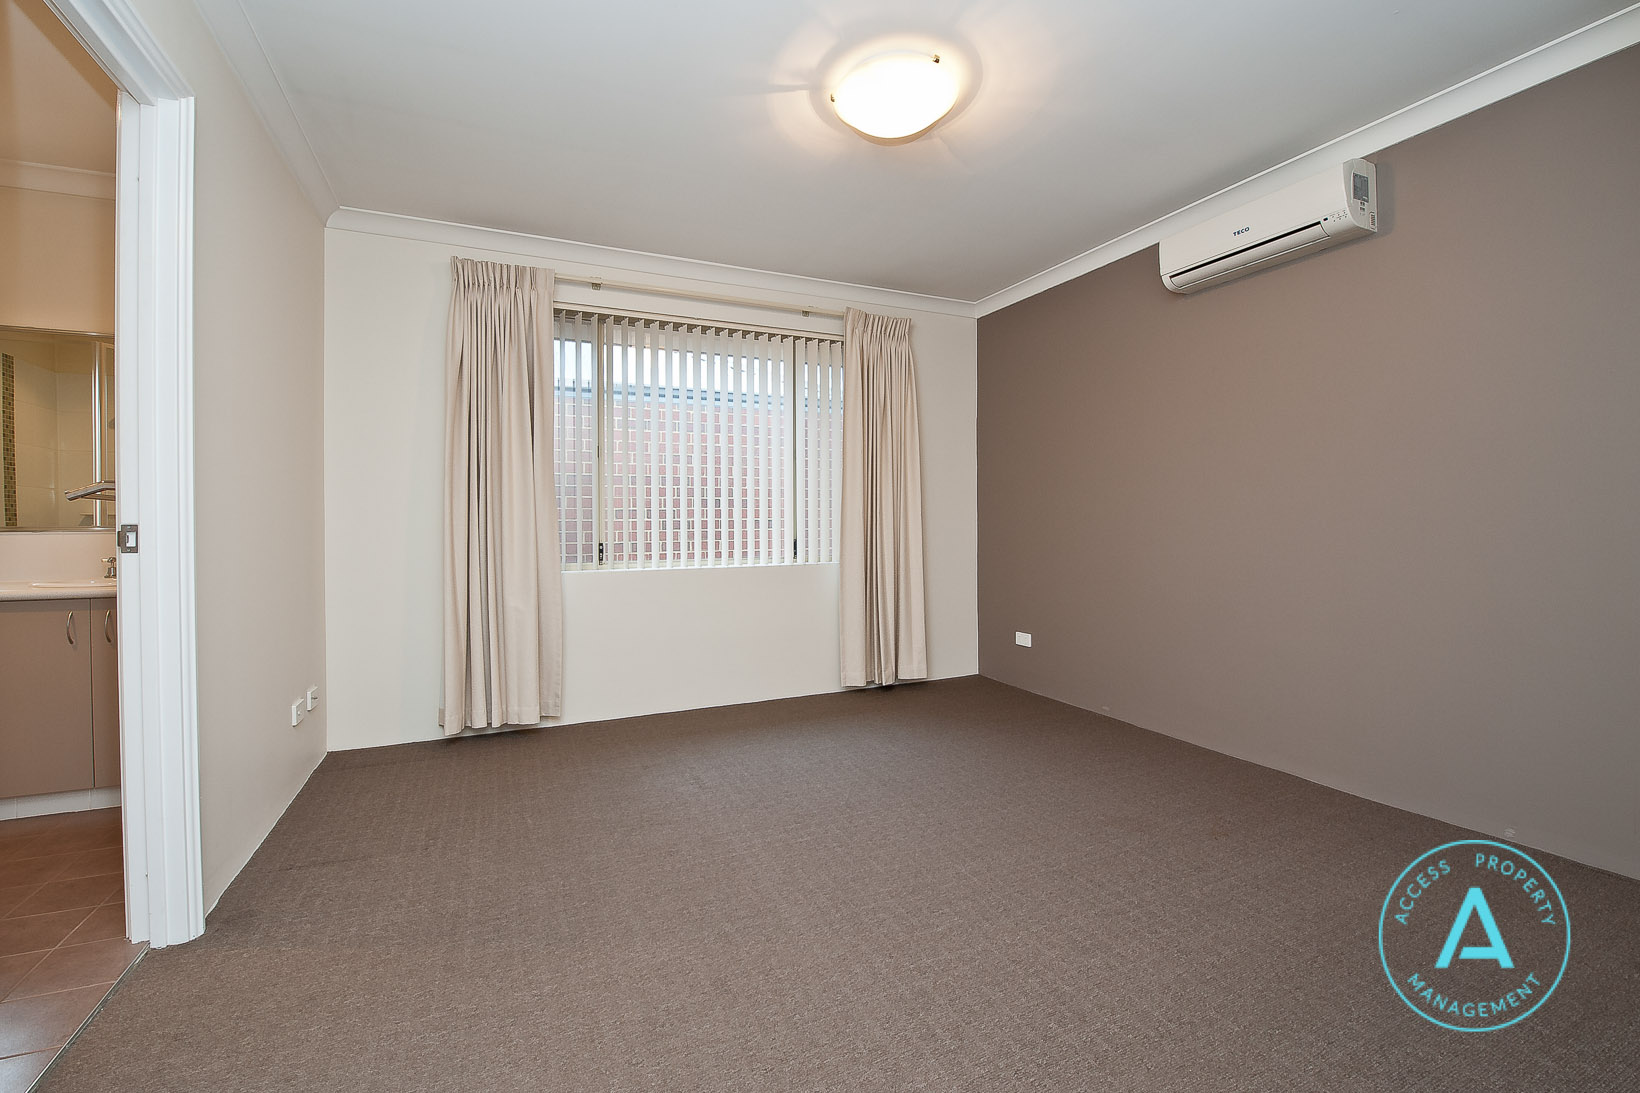 Access Property Management 7/8 Forster Avenue Bedroom